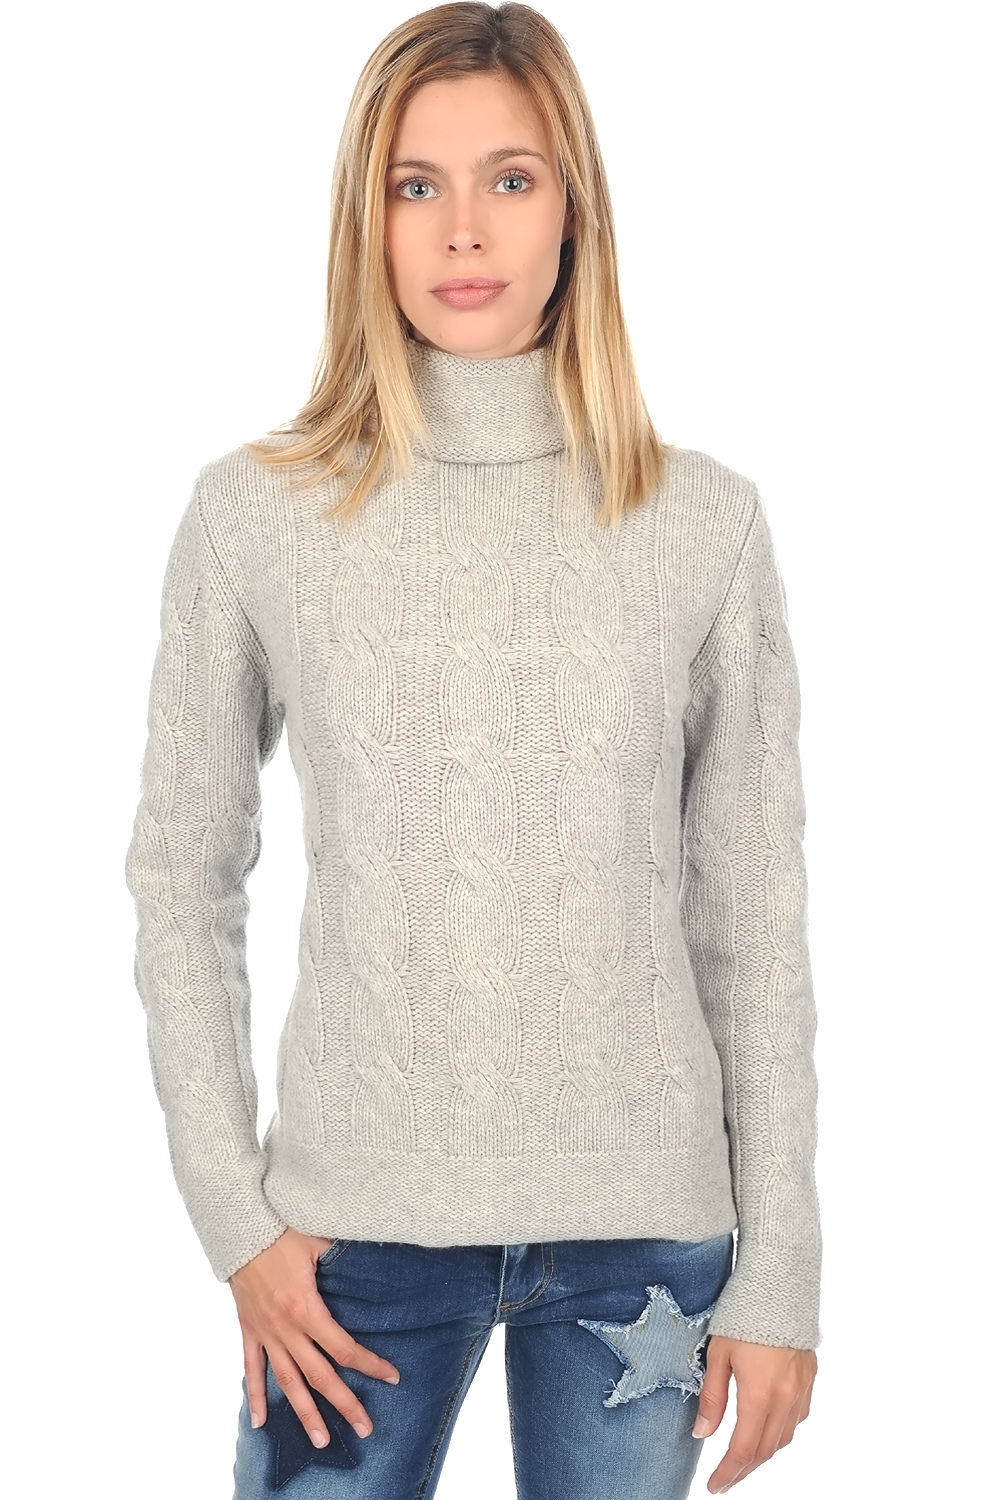 Cachemire pull femme blanche flanelle chine 2xl